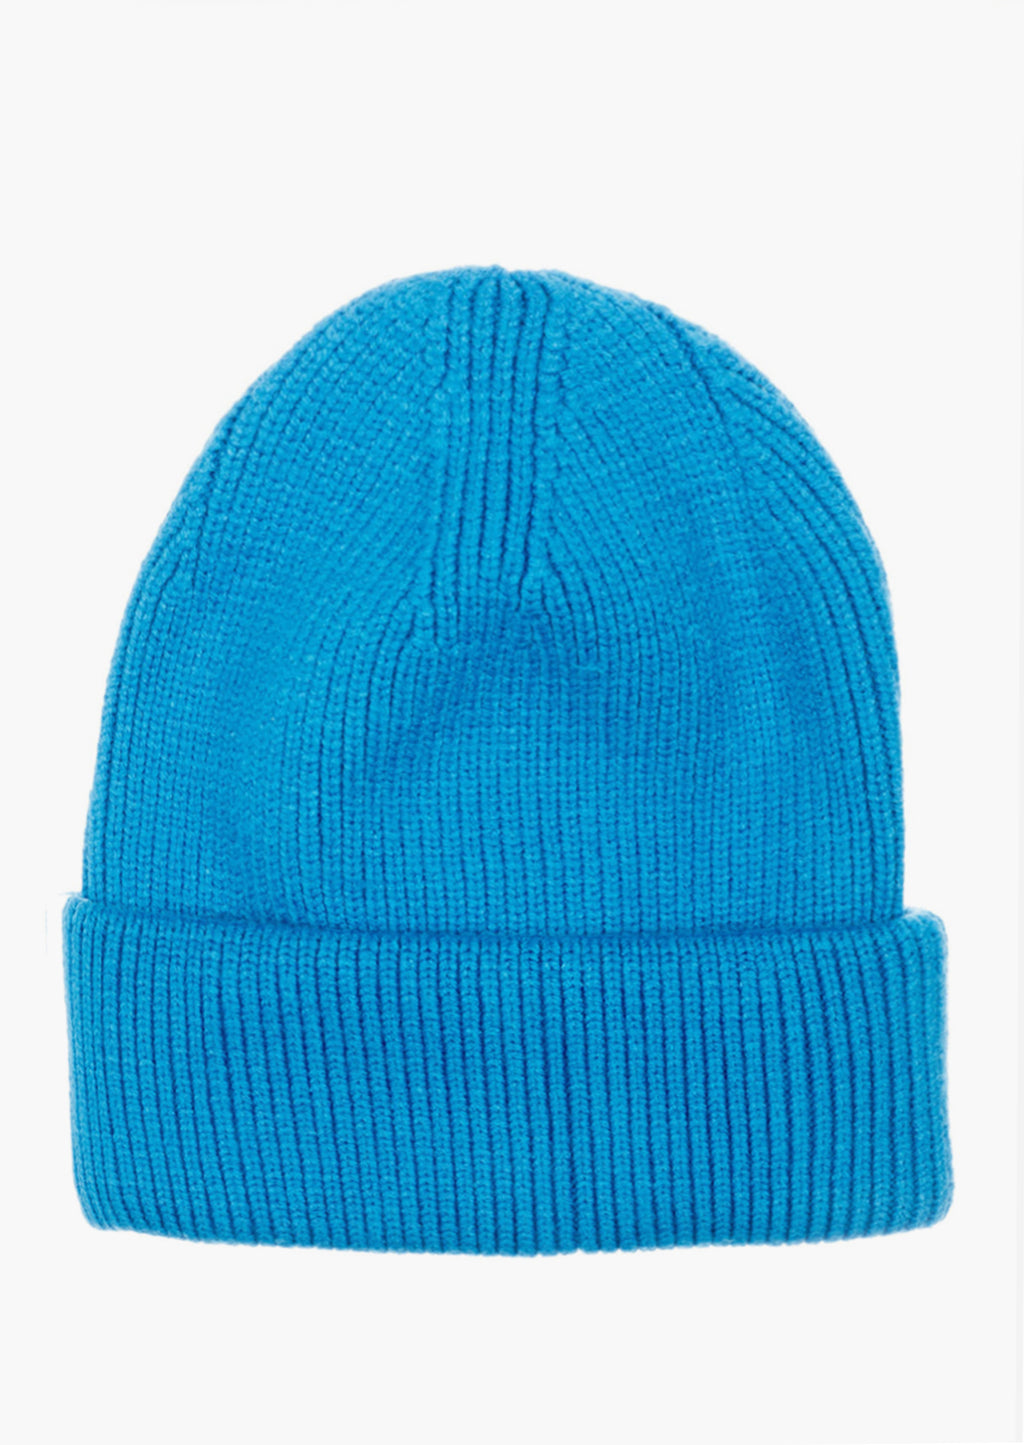 Sea: A knit beanie with oversized cuff in turquoise blue color.